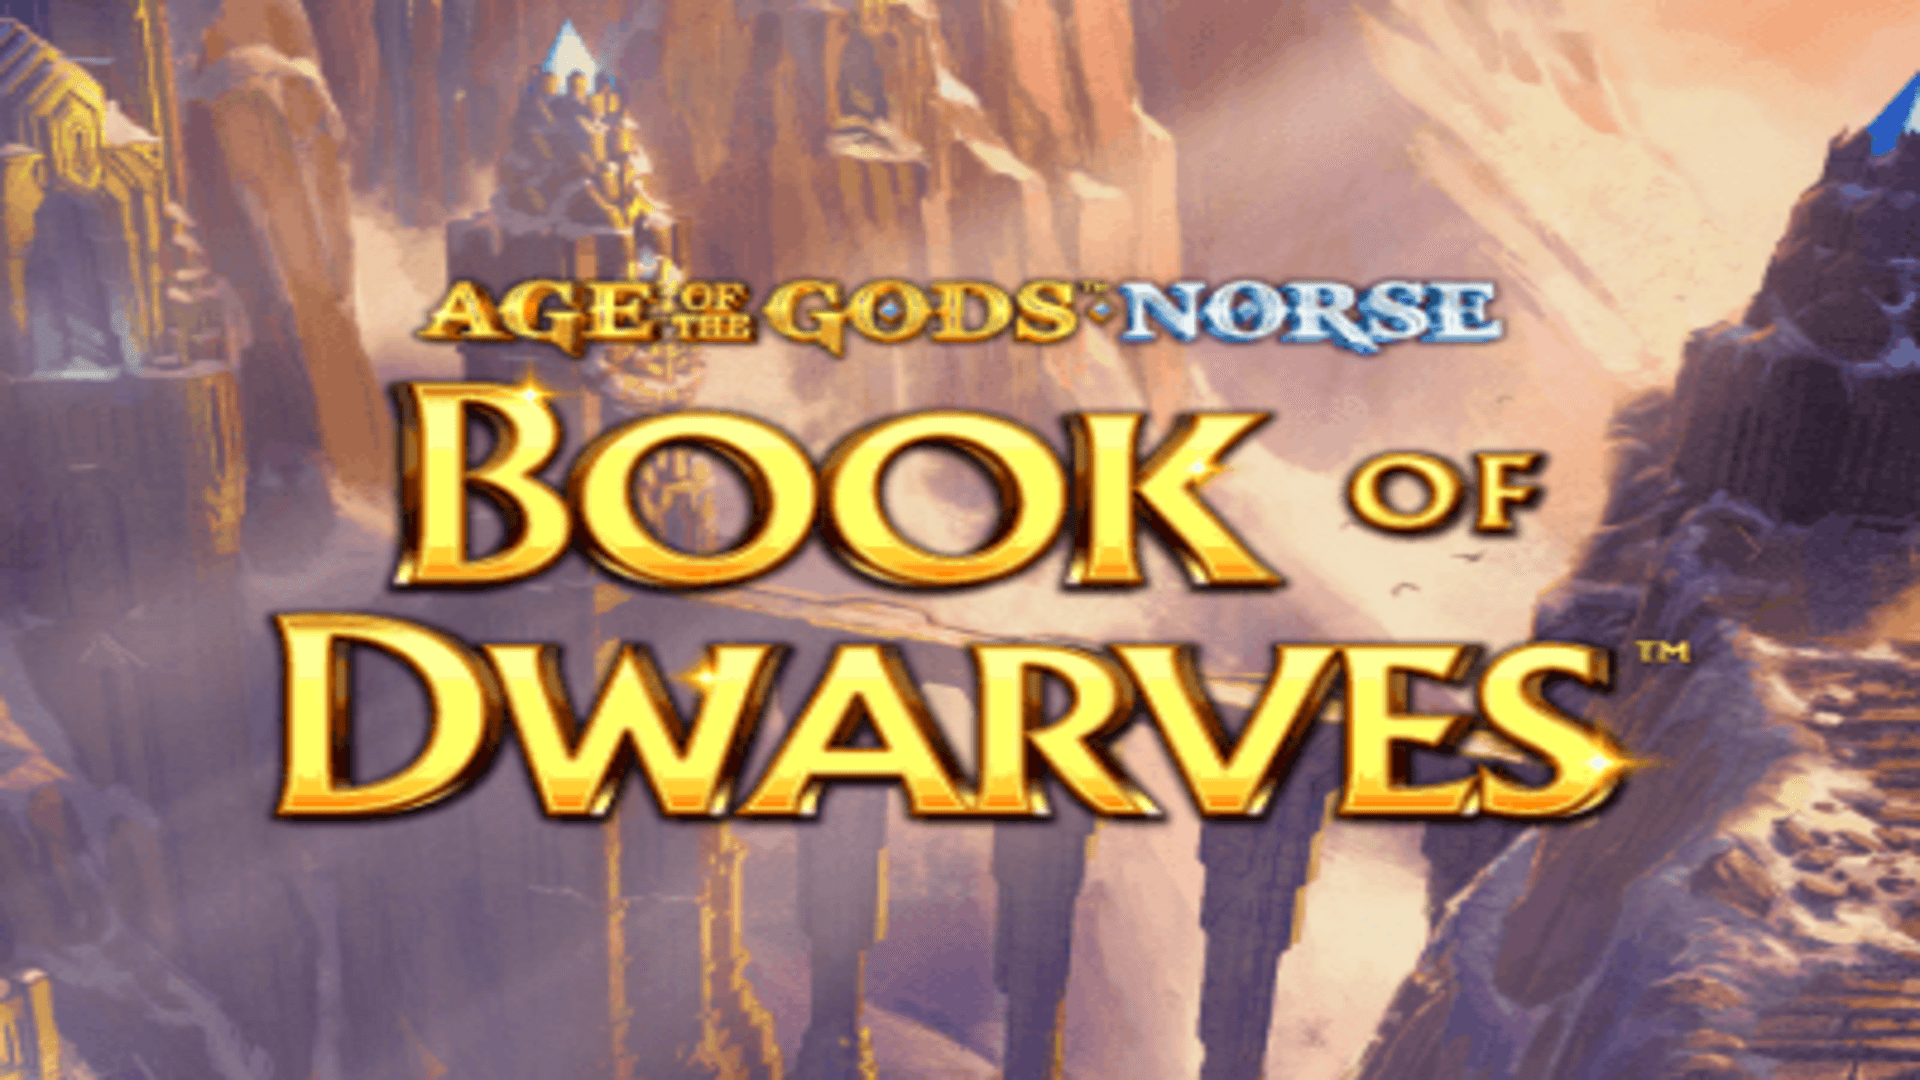 Age of the Gods Norse: Book of Dwarves Slot Machine Free Game Play